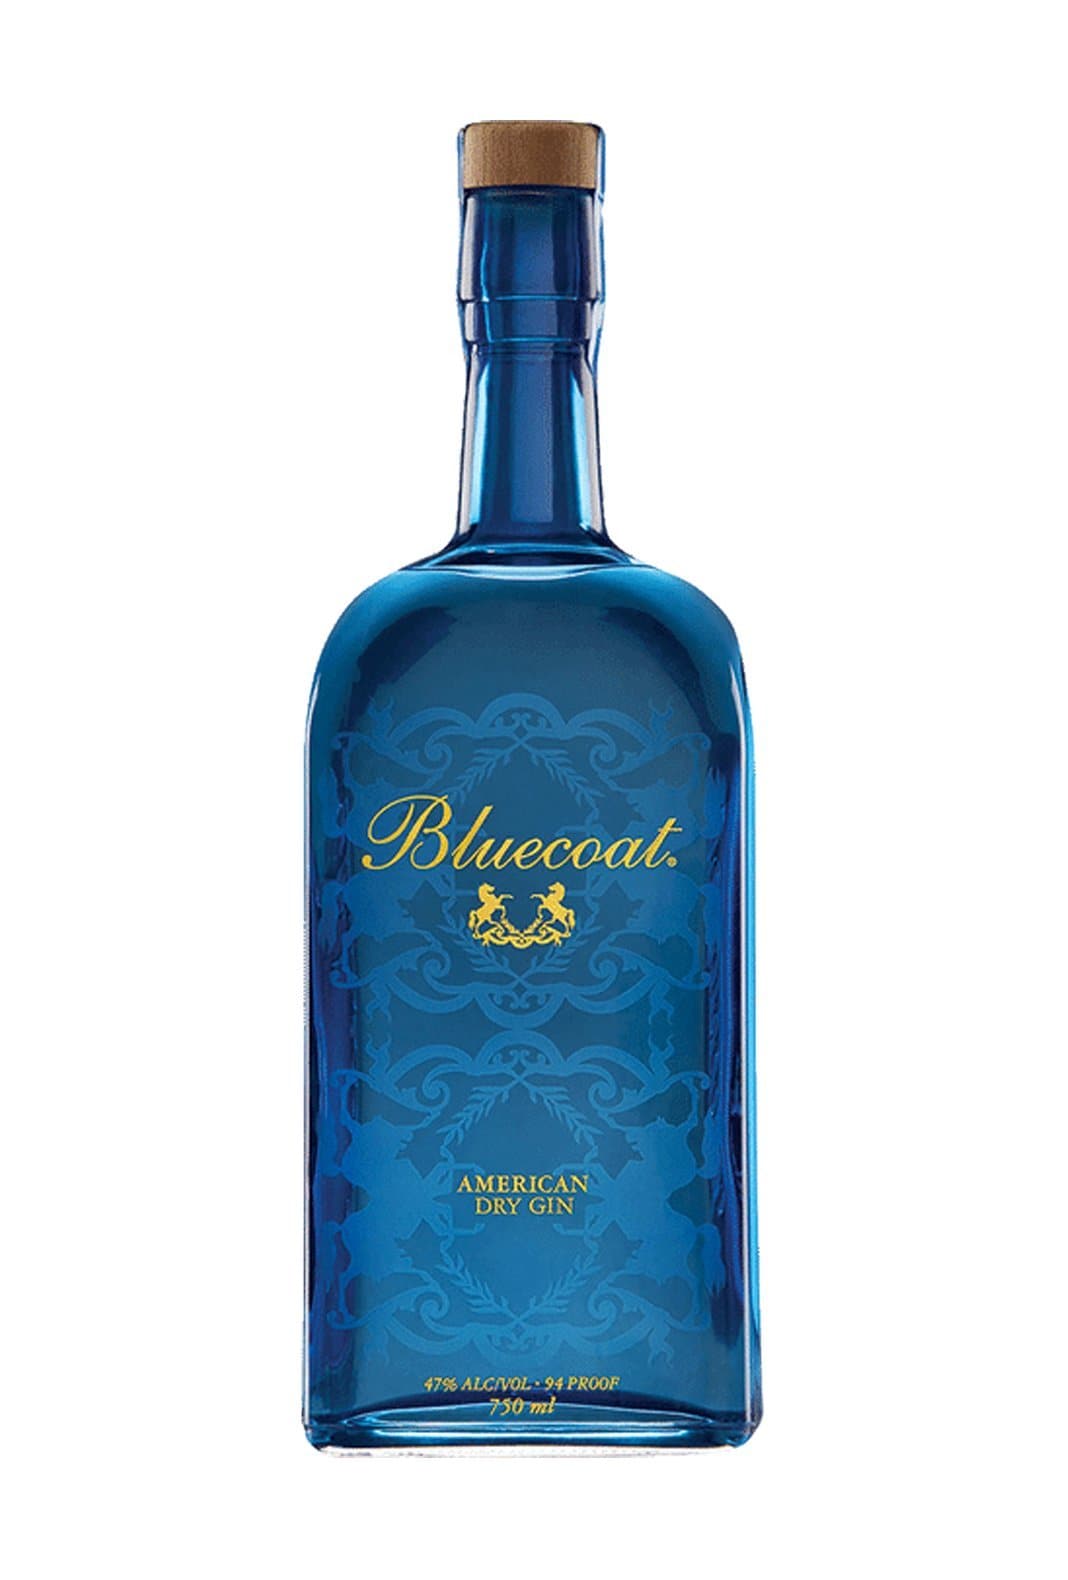 Bluecoat American Gin 47% 700ml | Gin | Shop online at Spirits of France